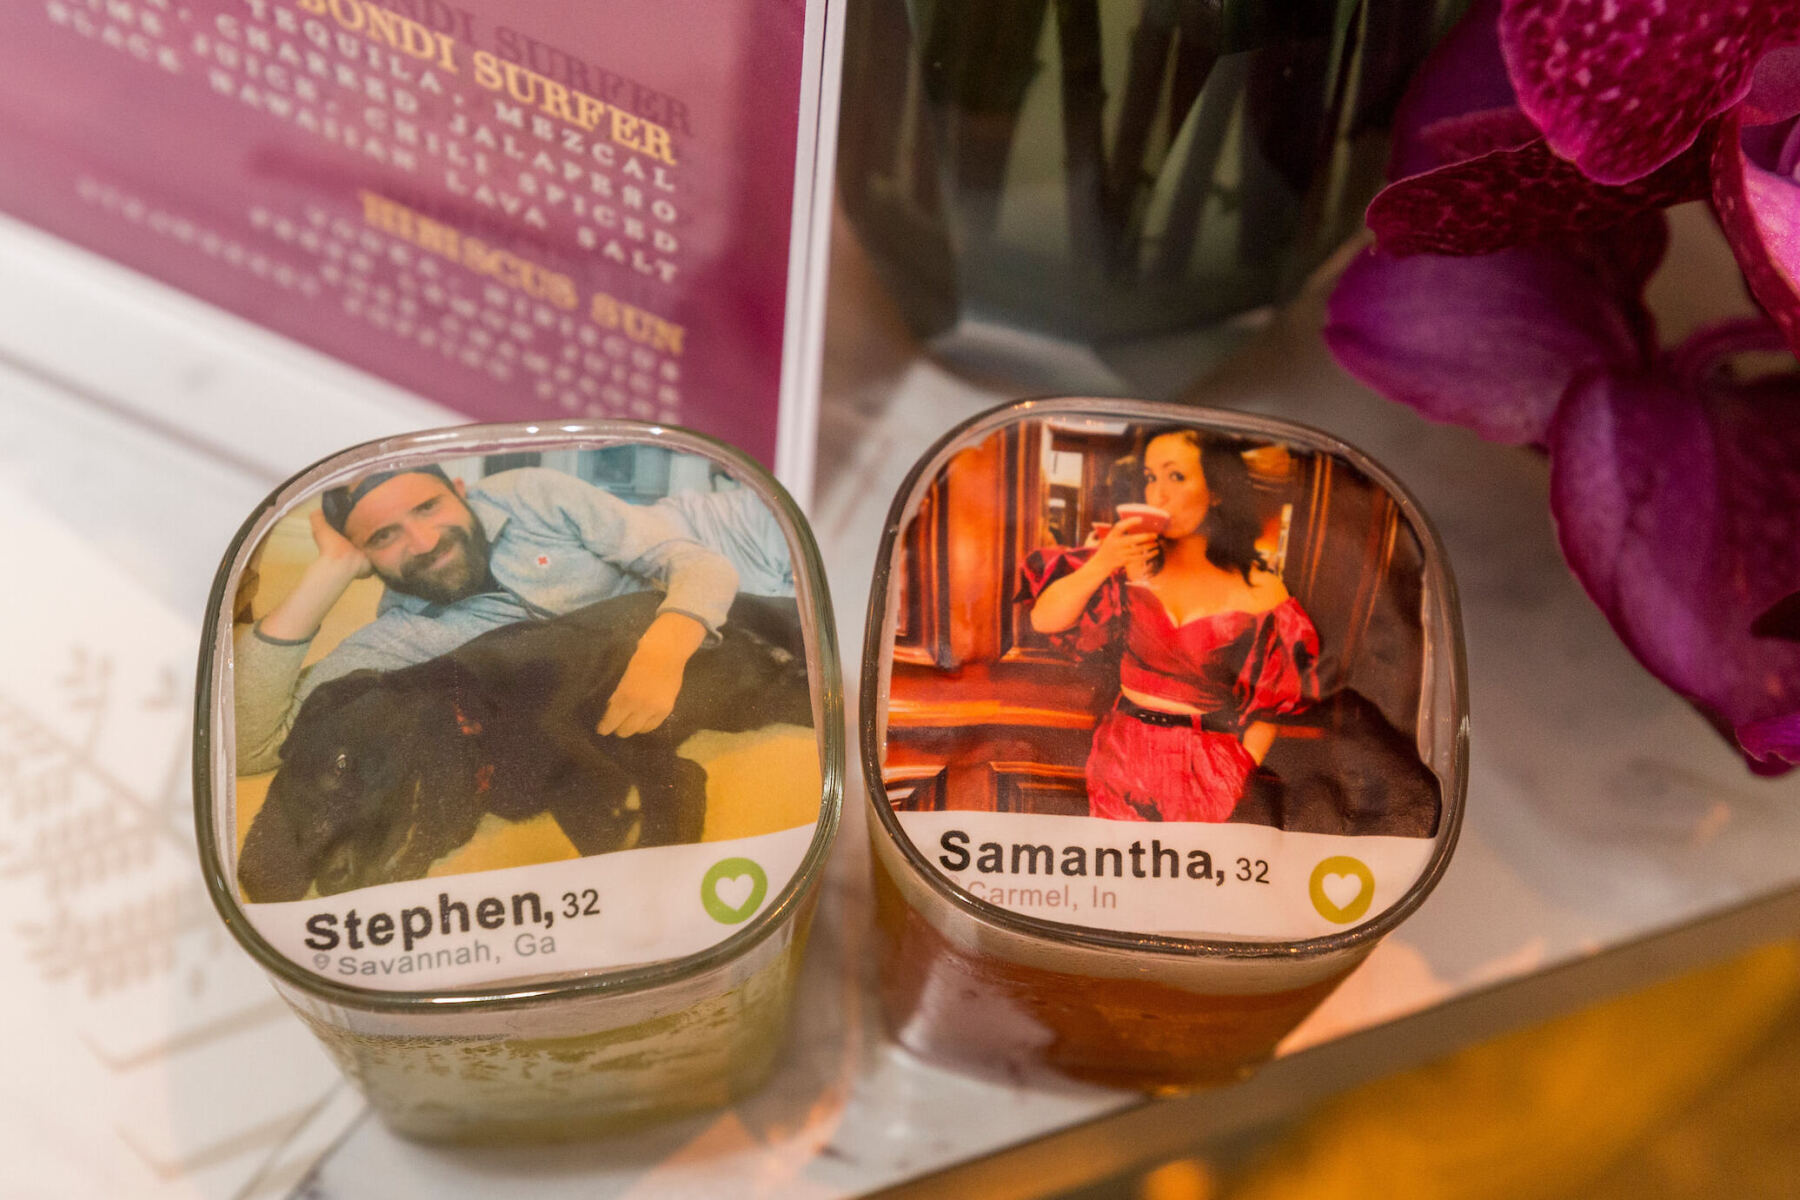 Drinks were topped with edible renderings of the bride and groom's Tinder profiles at their glam enchanted wedding.